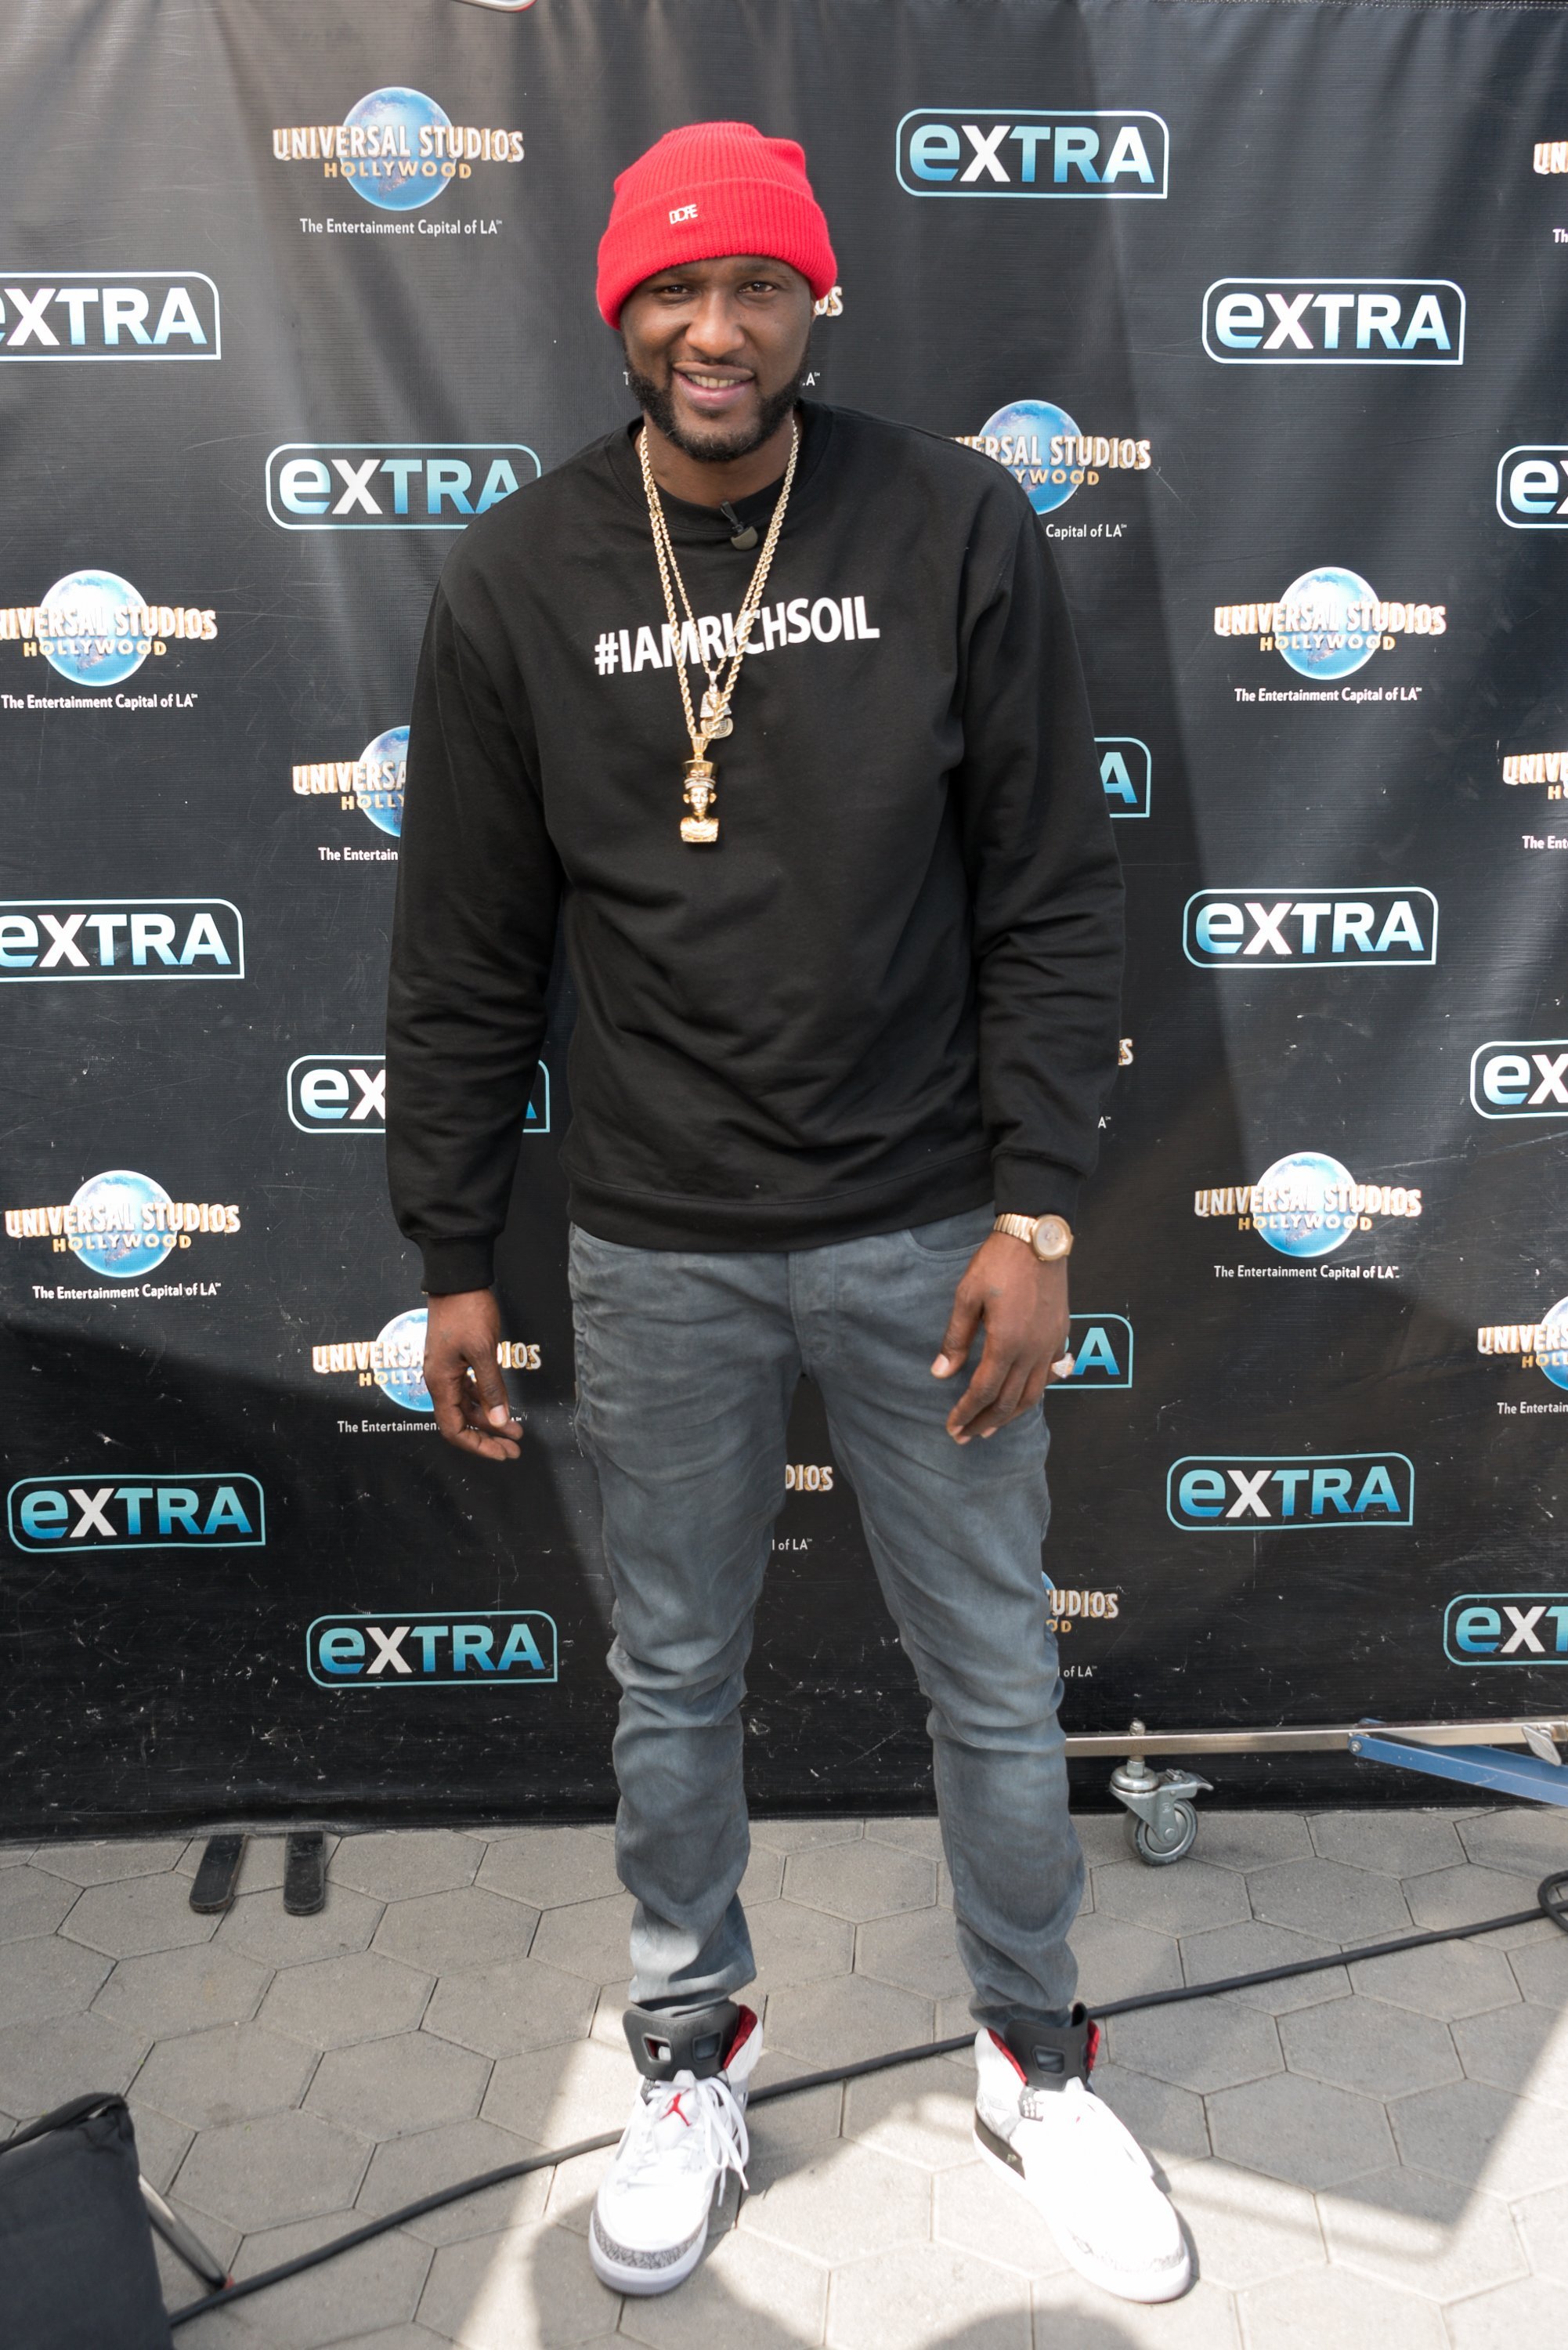 Lamar Odom visit "Extra" at Universal Studios Hollywood on Feb. 22, 2018 in California. | Photo: Getty Images